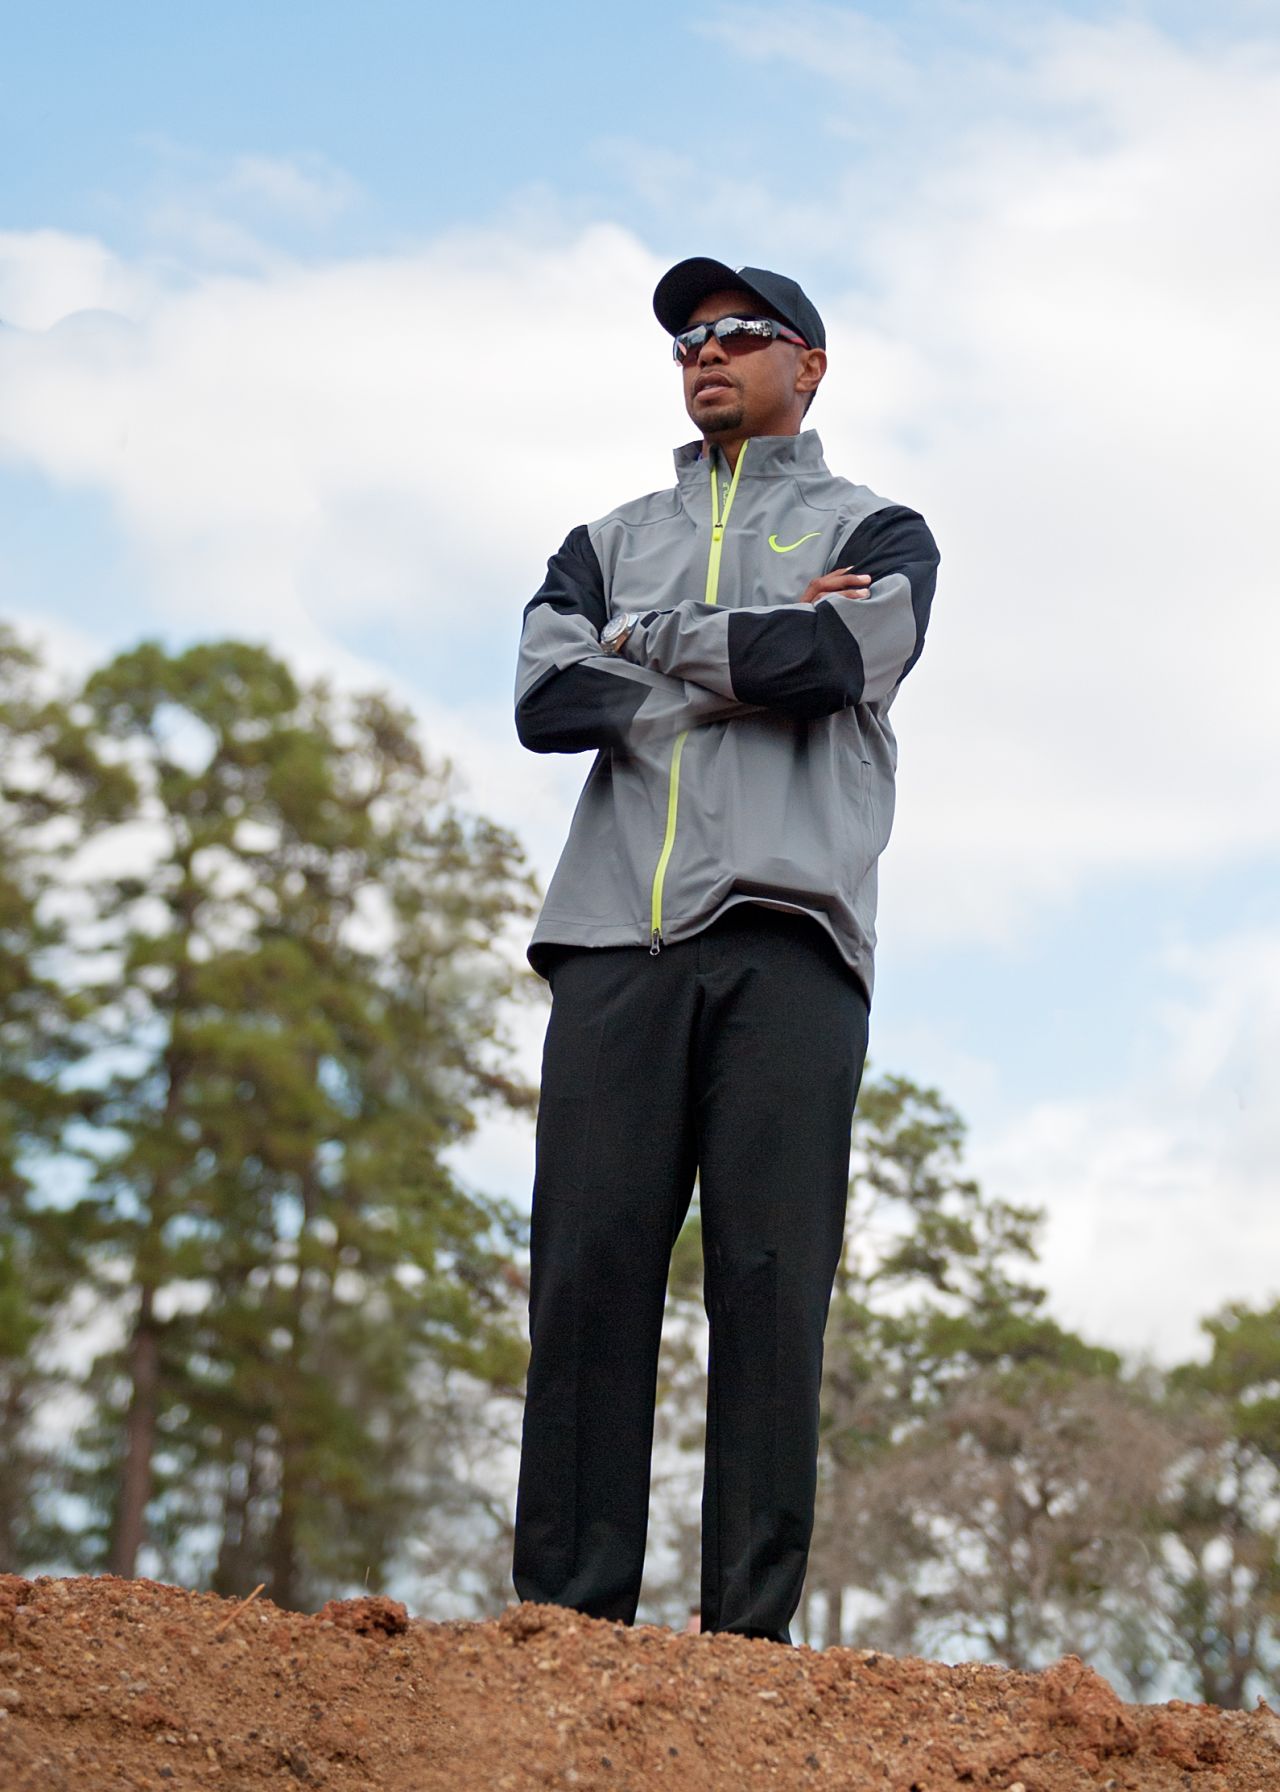 Woods has been making regular visits to the site near the small town of Montgomery ahead of the opening of his first domestic course. He told CNN of the set up: "Bluejack National has one of the best natural settings for golf I have seen."